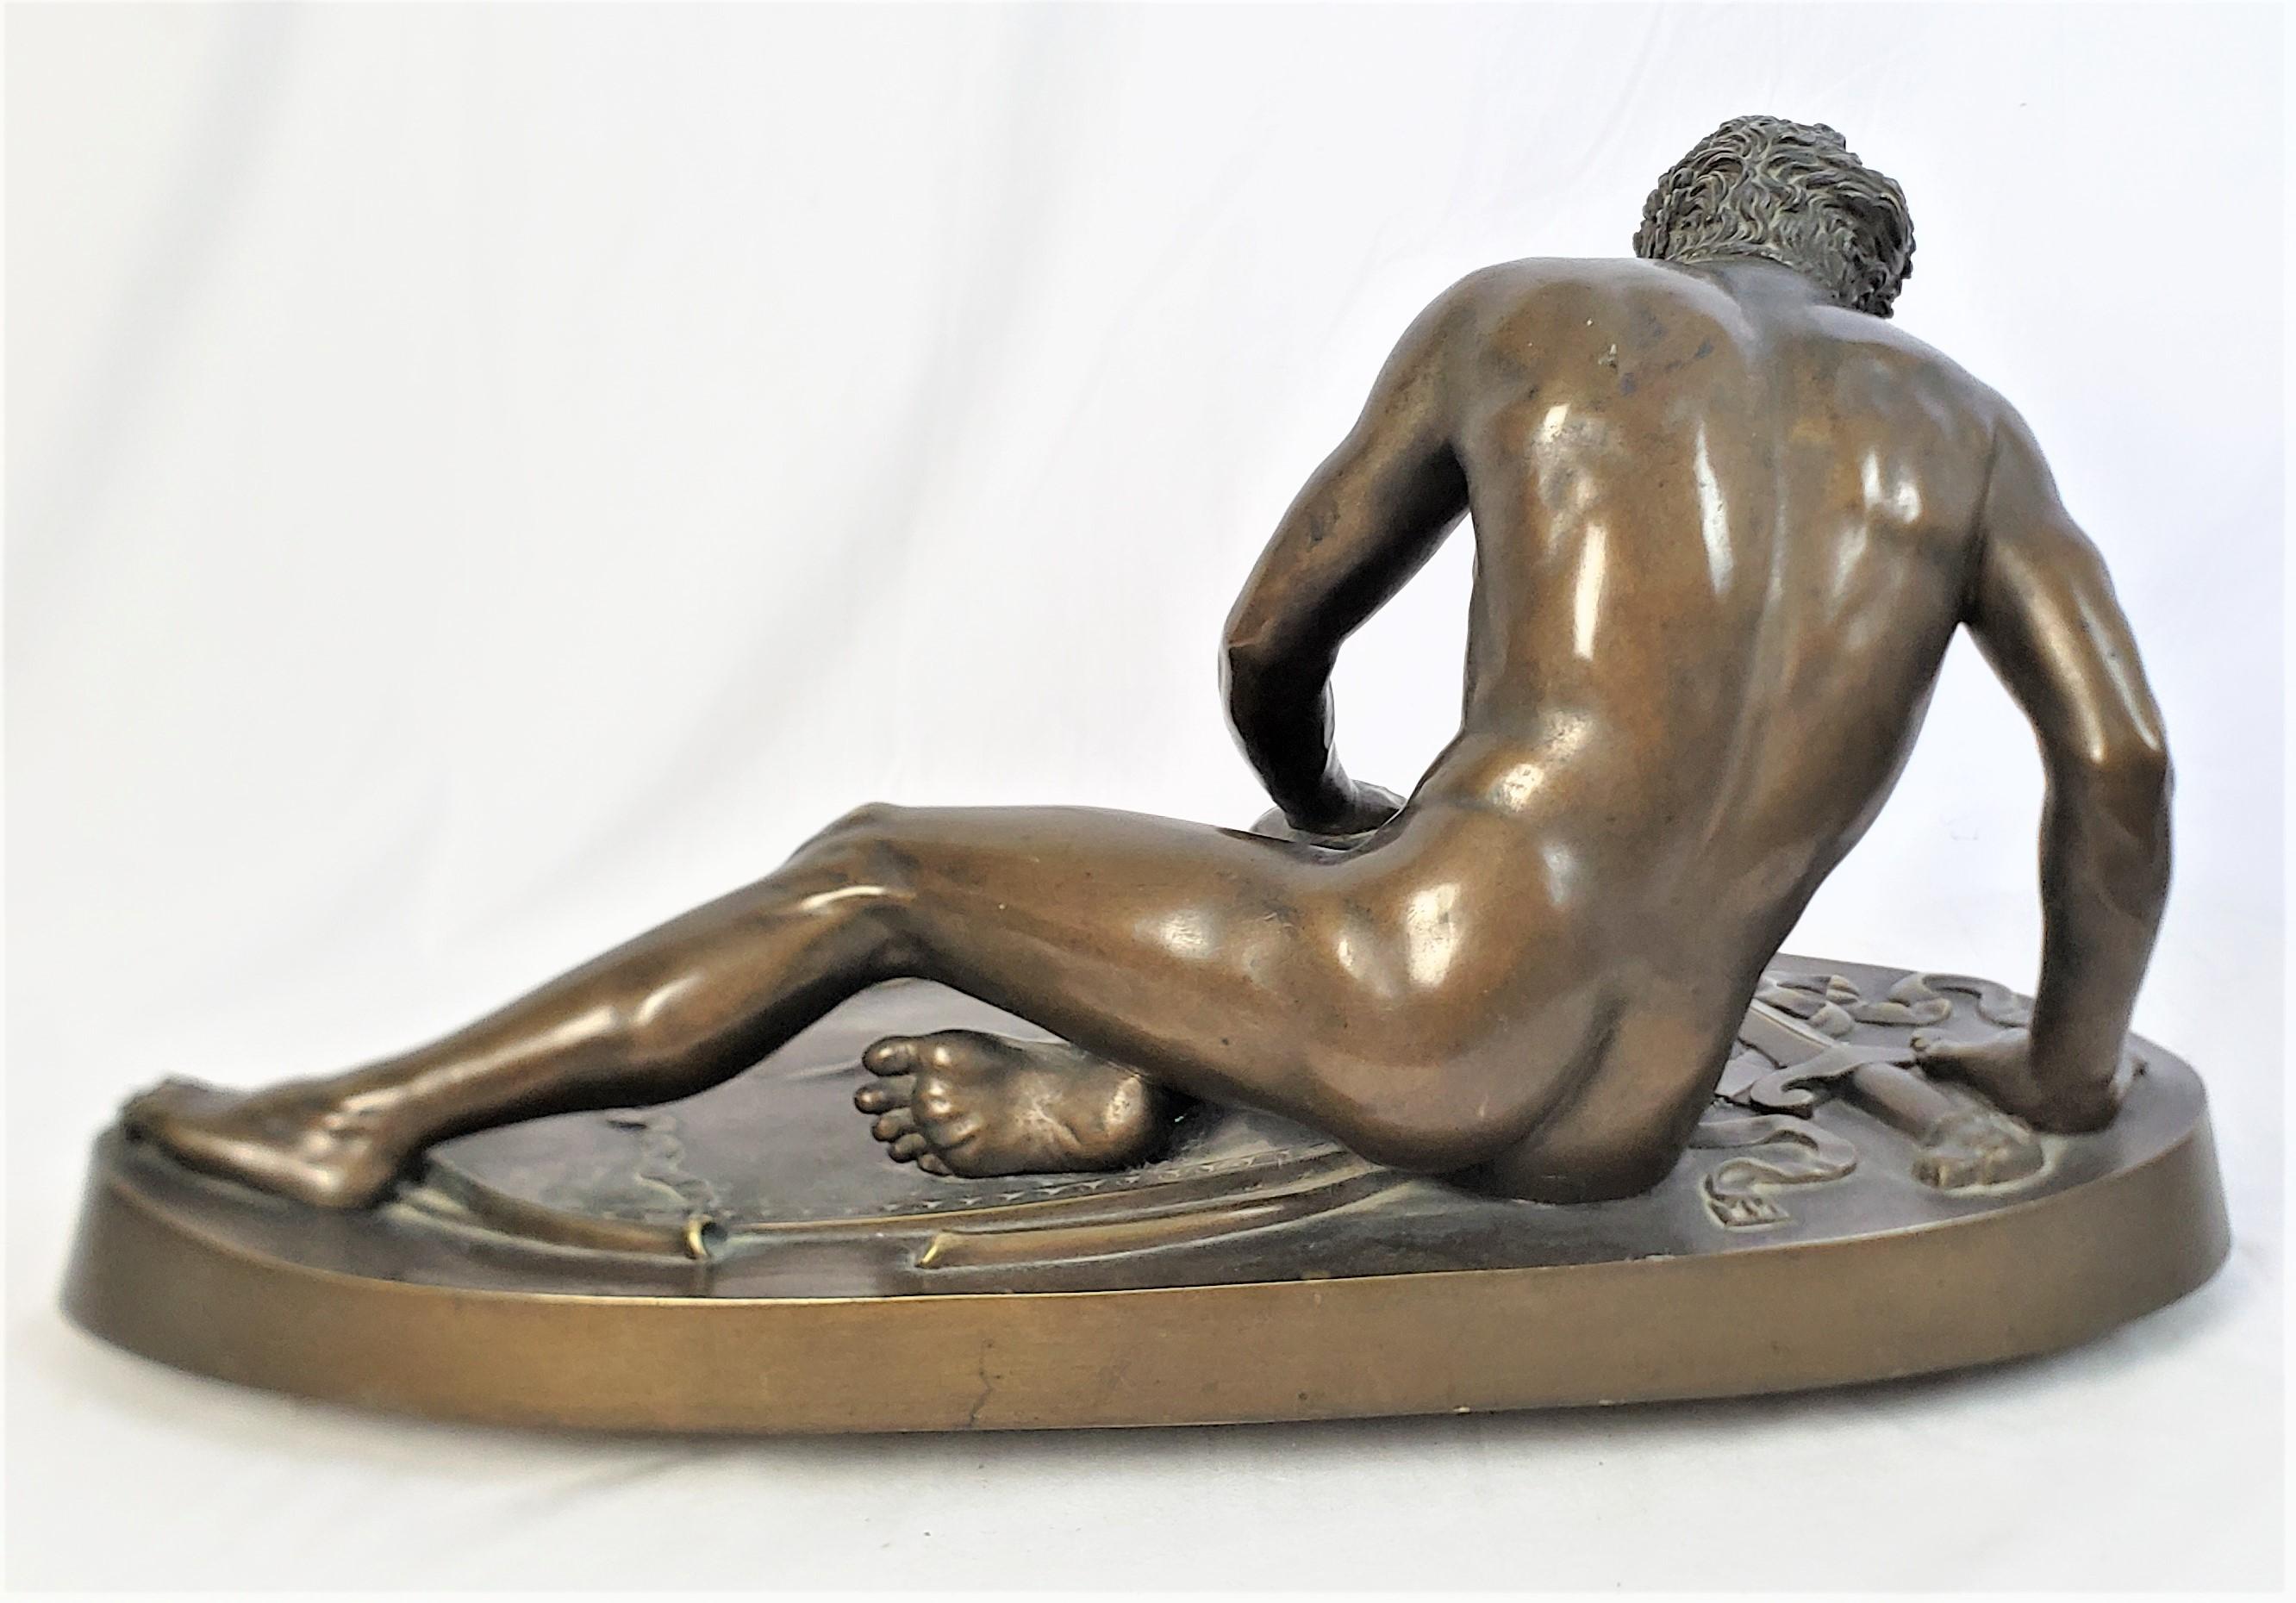 Large Antique Nelli Roma Bronze Sculpture 'The Dying Gaul' on a Plinthe Base In Good Condition For Sale In Hamilton, Ontario